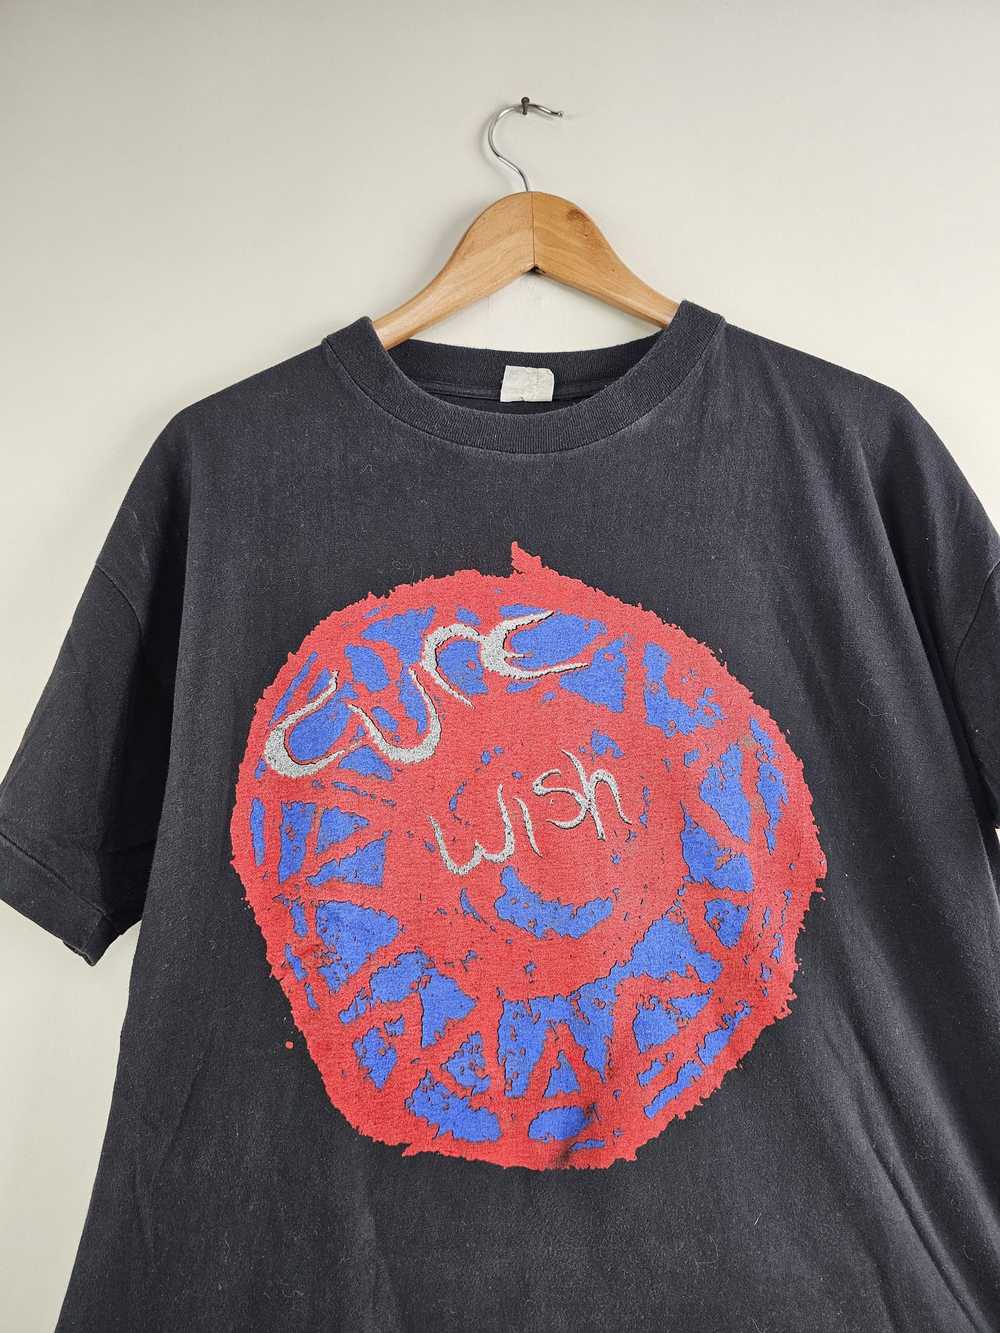 Band Tees × The Cure × Vintage 1992 The Cure Wish… - image 2